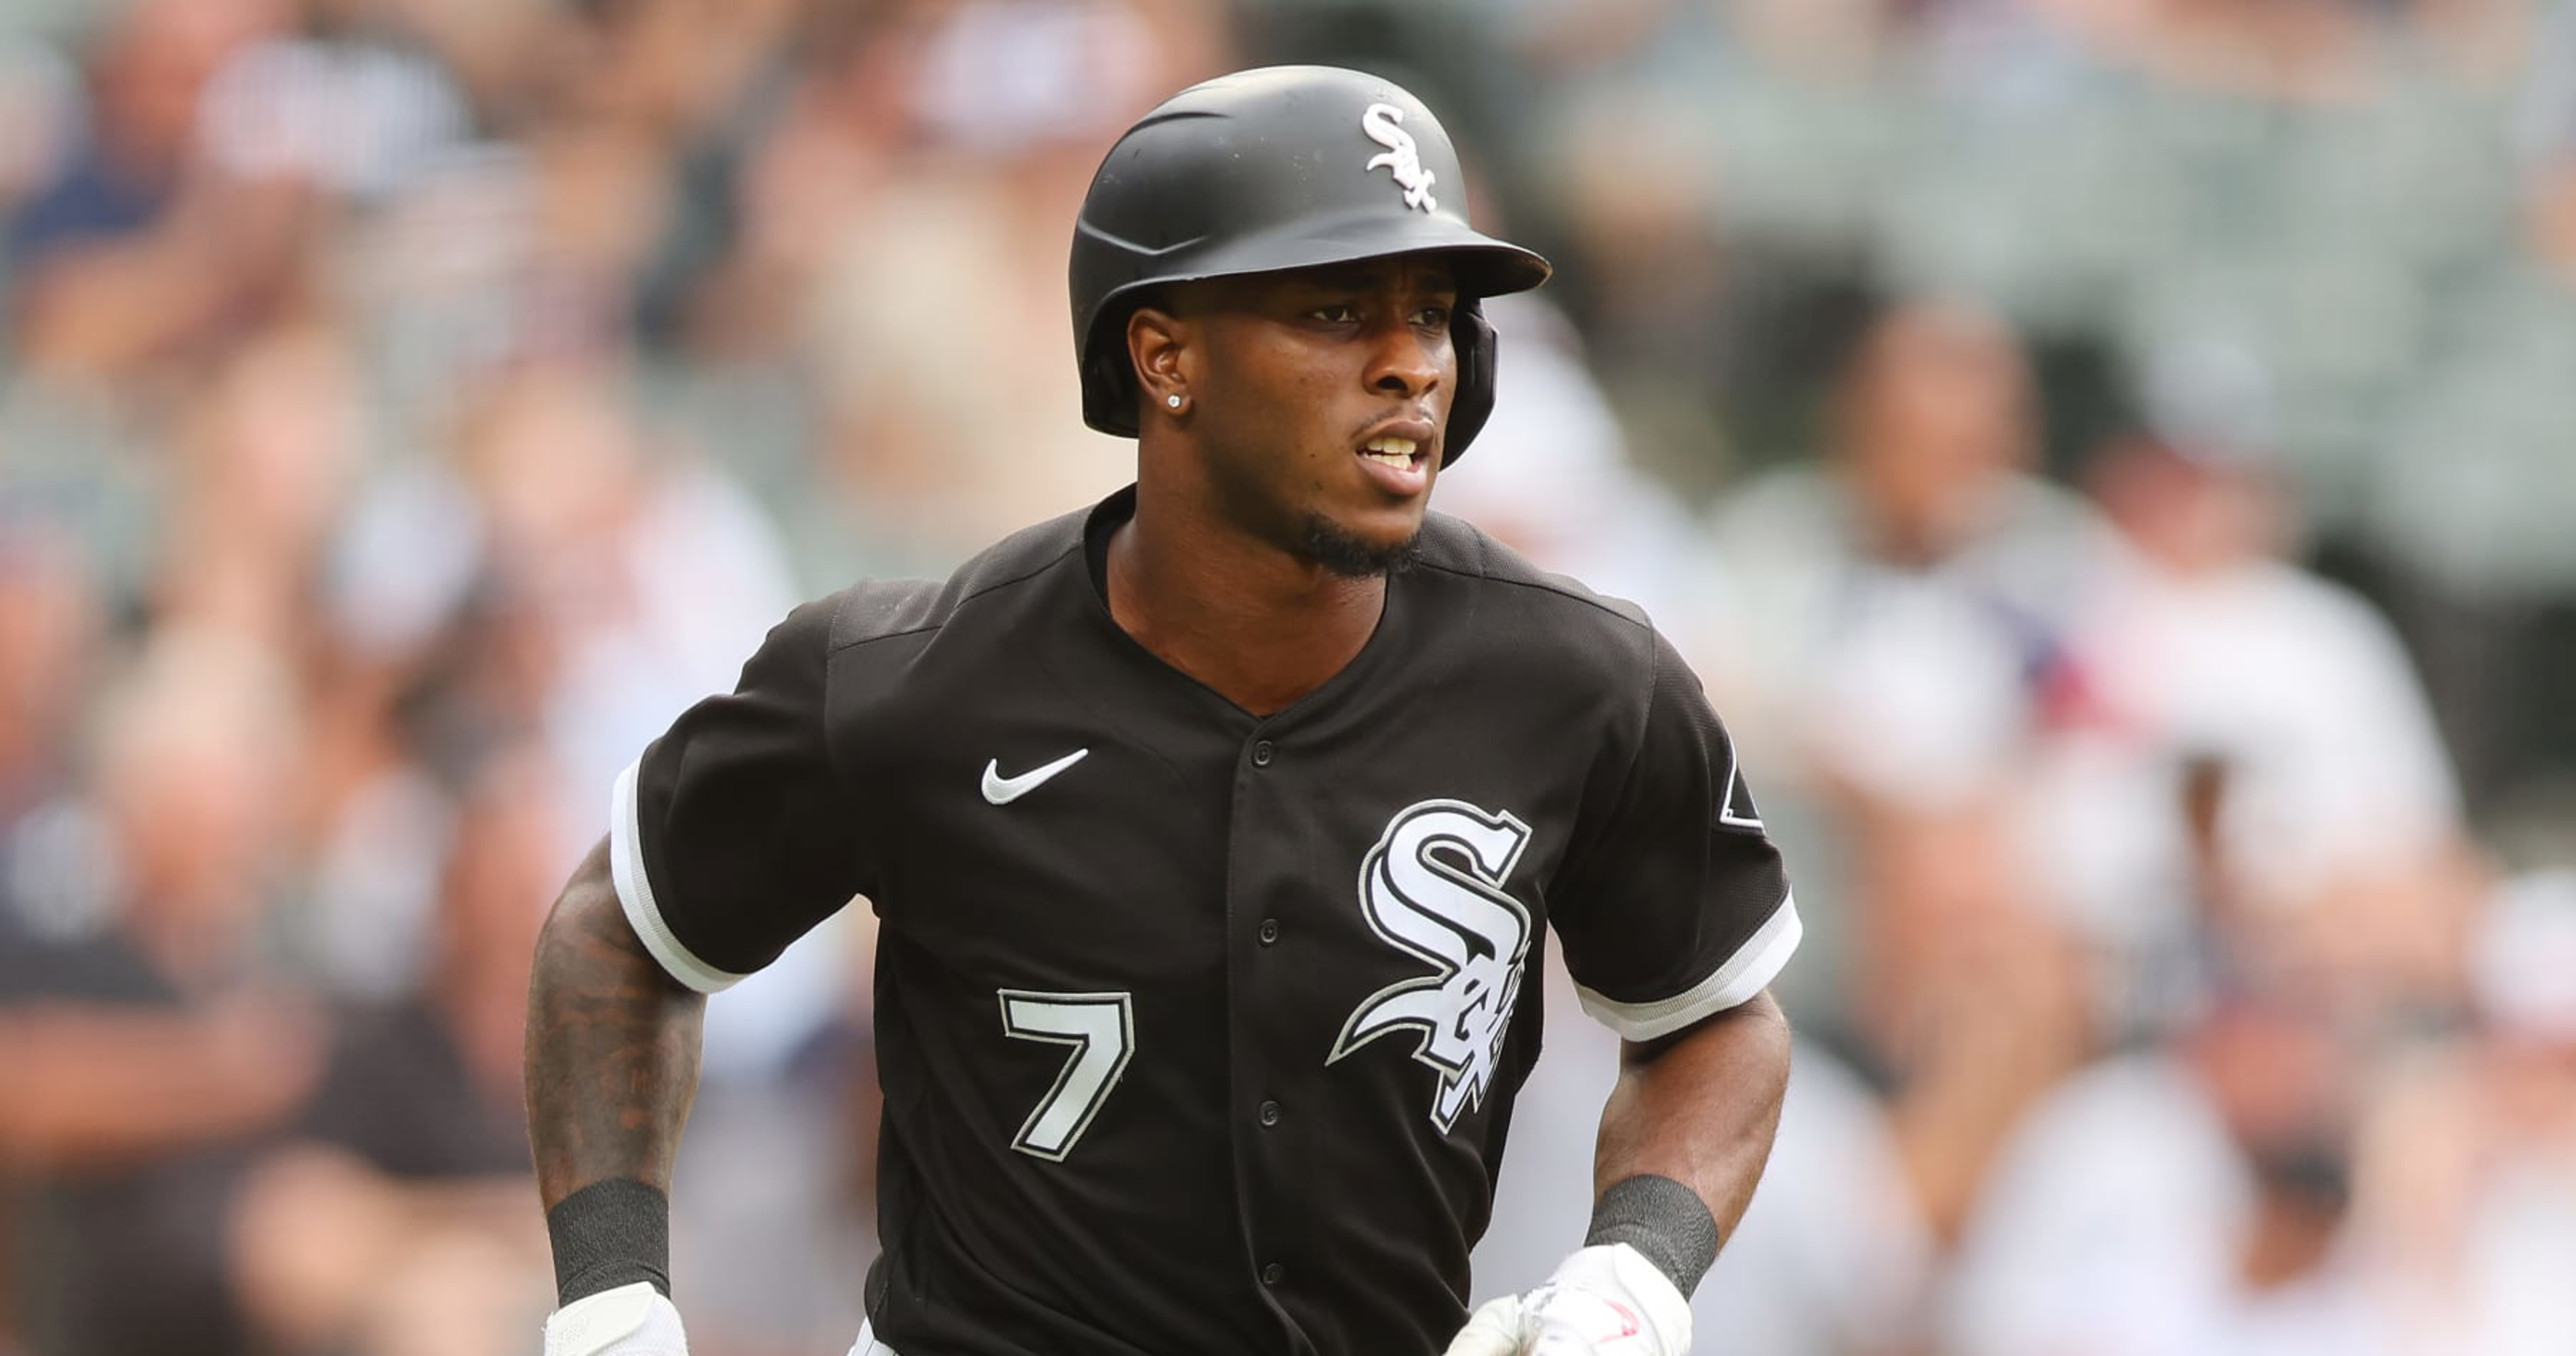 MLB Rumors: White Sox SS Tim Anderson out 4-6 Weeks with Hand Injury